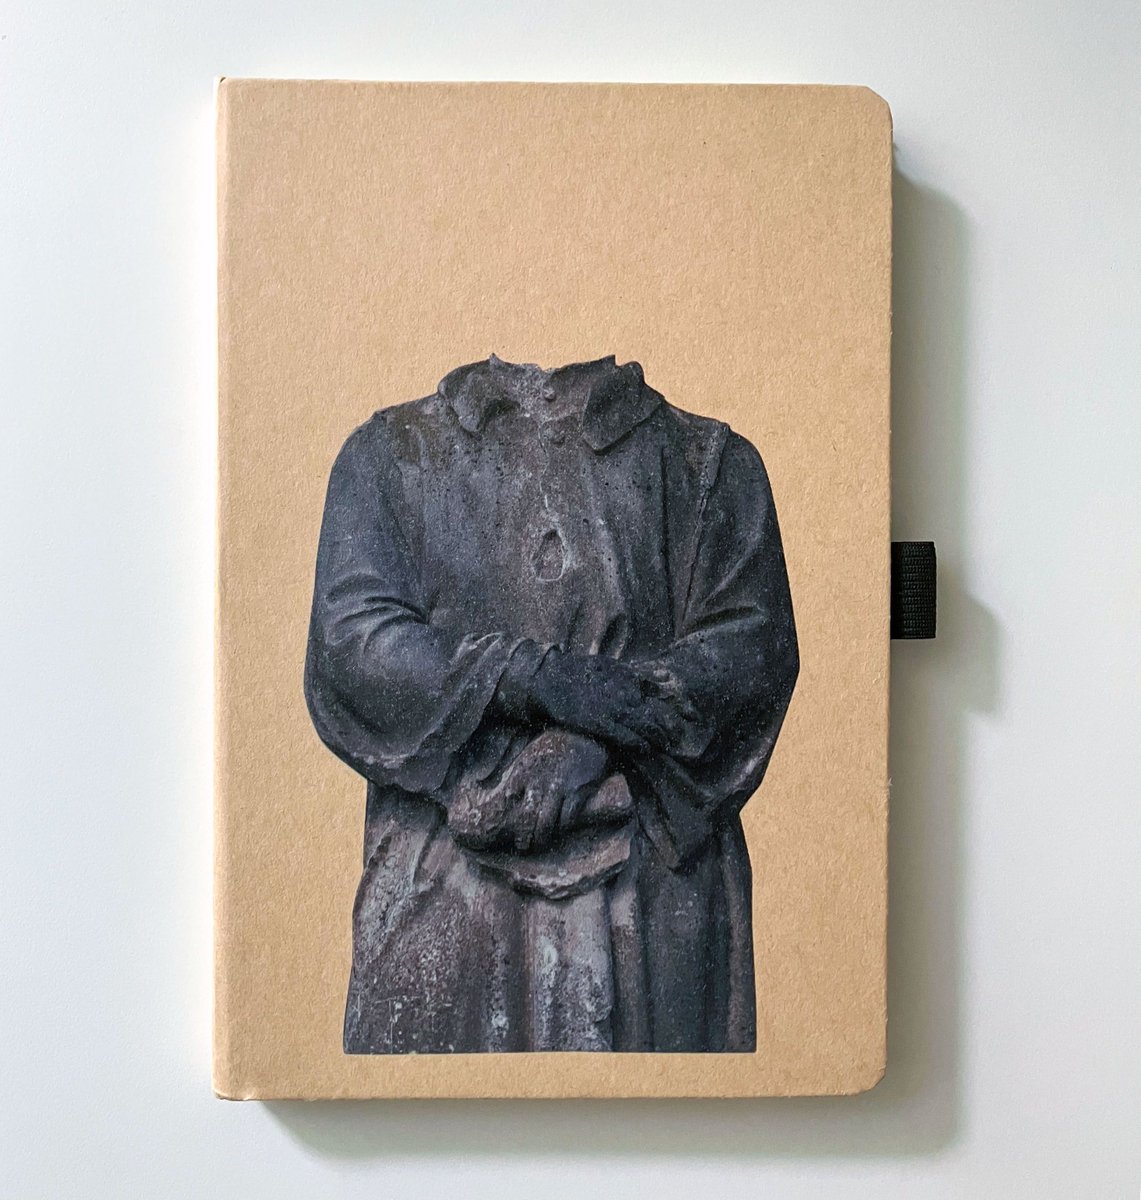 📣 New merch has just arrived in our shop 📣 These super stylish notebooks celebrate the wonderful sculptures in Crystal Palace Park & help support our work as an inclusive arts & heritage charity! Browse our shop here 👉 invisible-palace.teemill.com #CrystalPalacePark